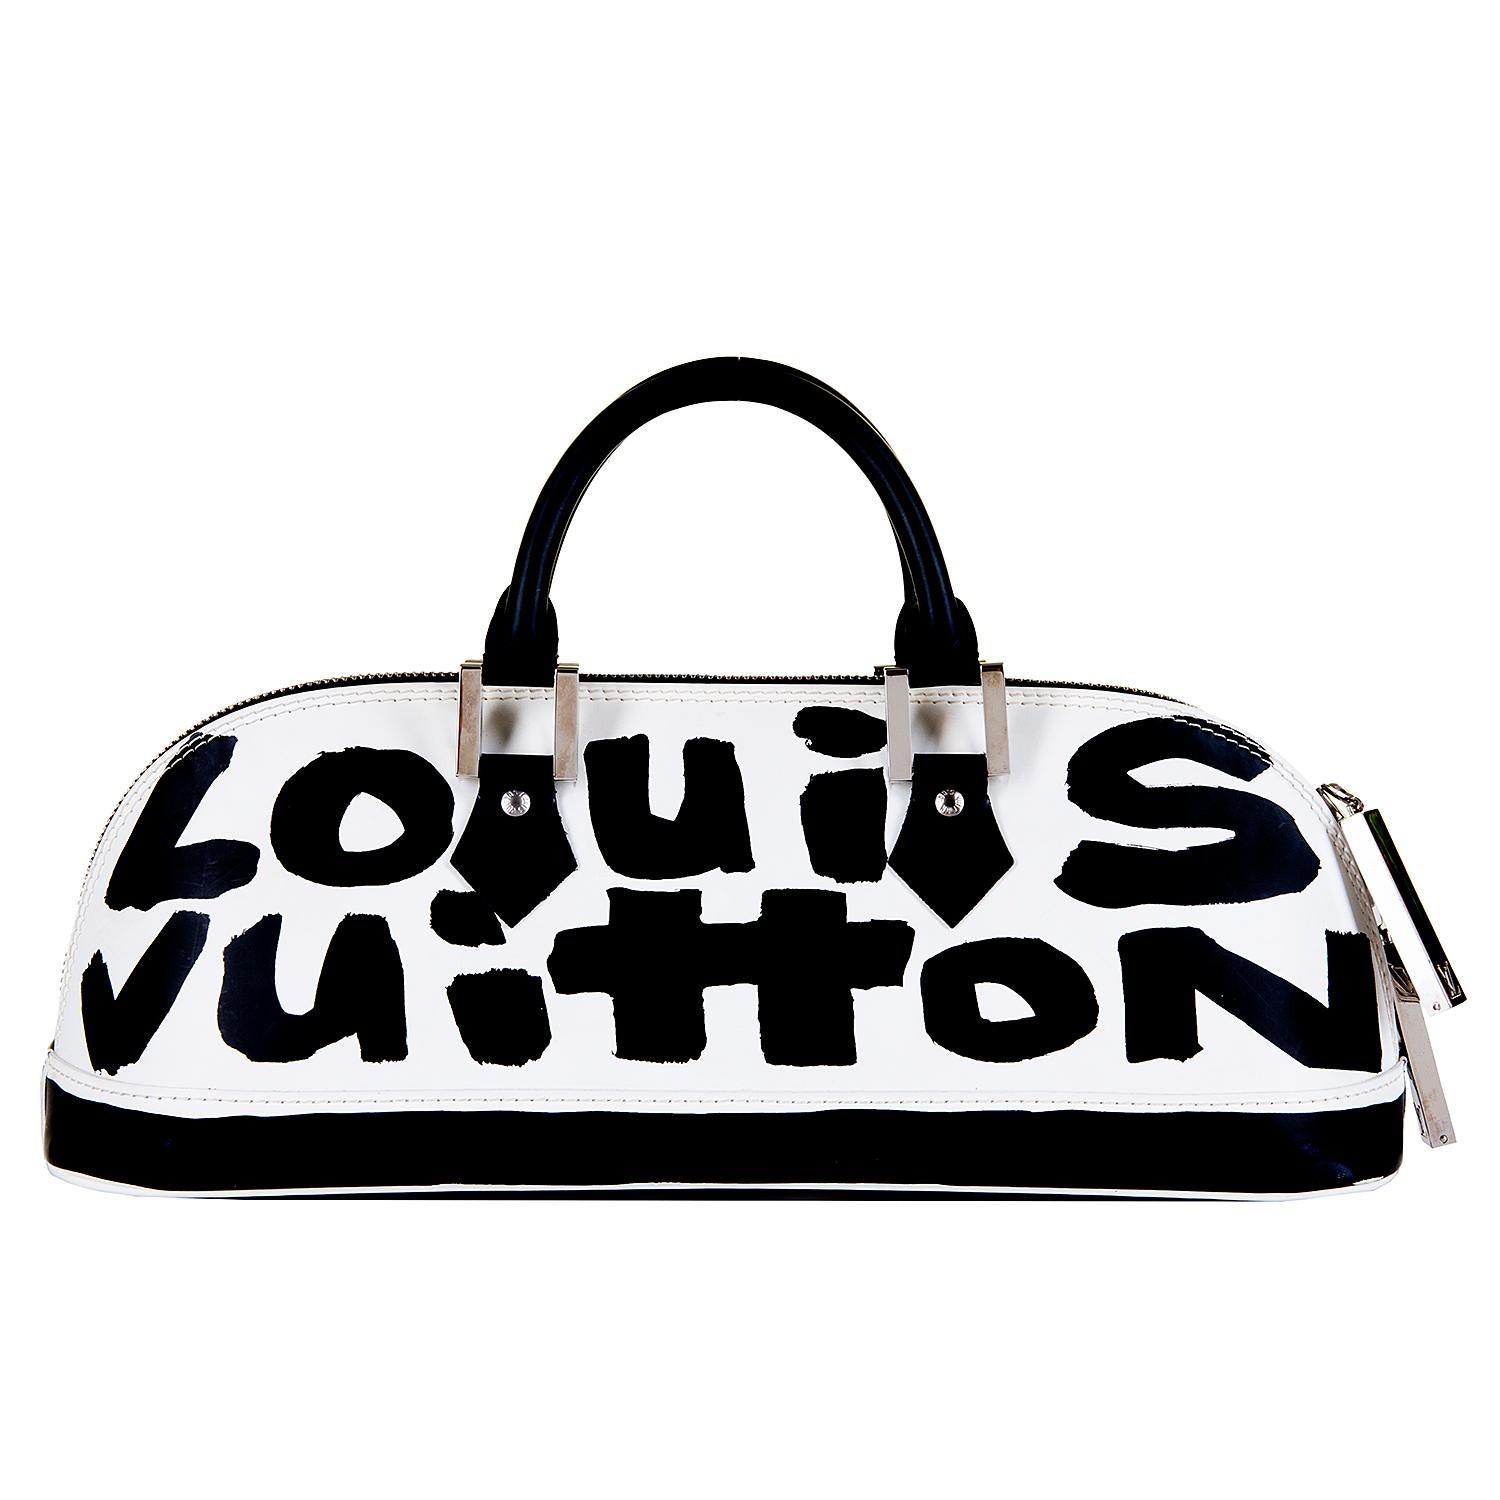 In pristine condition this rare Louis Vuitton Bag, is by the legendary designer Stephen Sprouse. From the East/West Collection, this Alma bag is finished in black & white Glace leather accented with silver tone hardware.